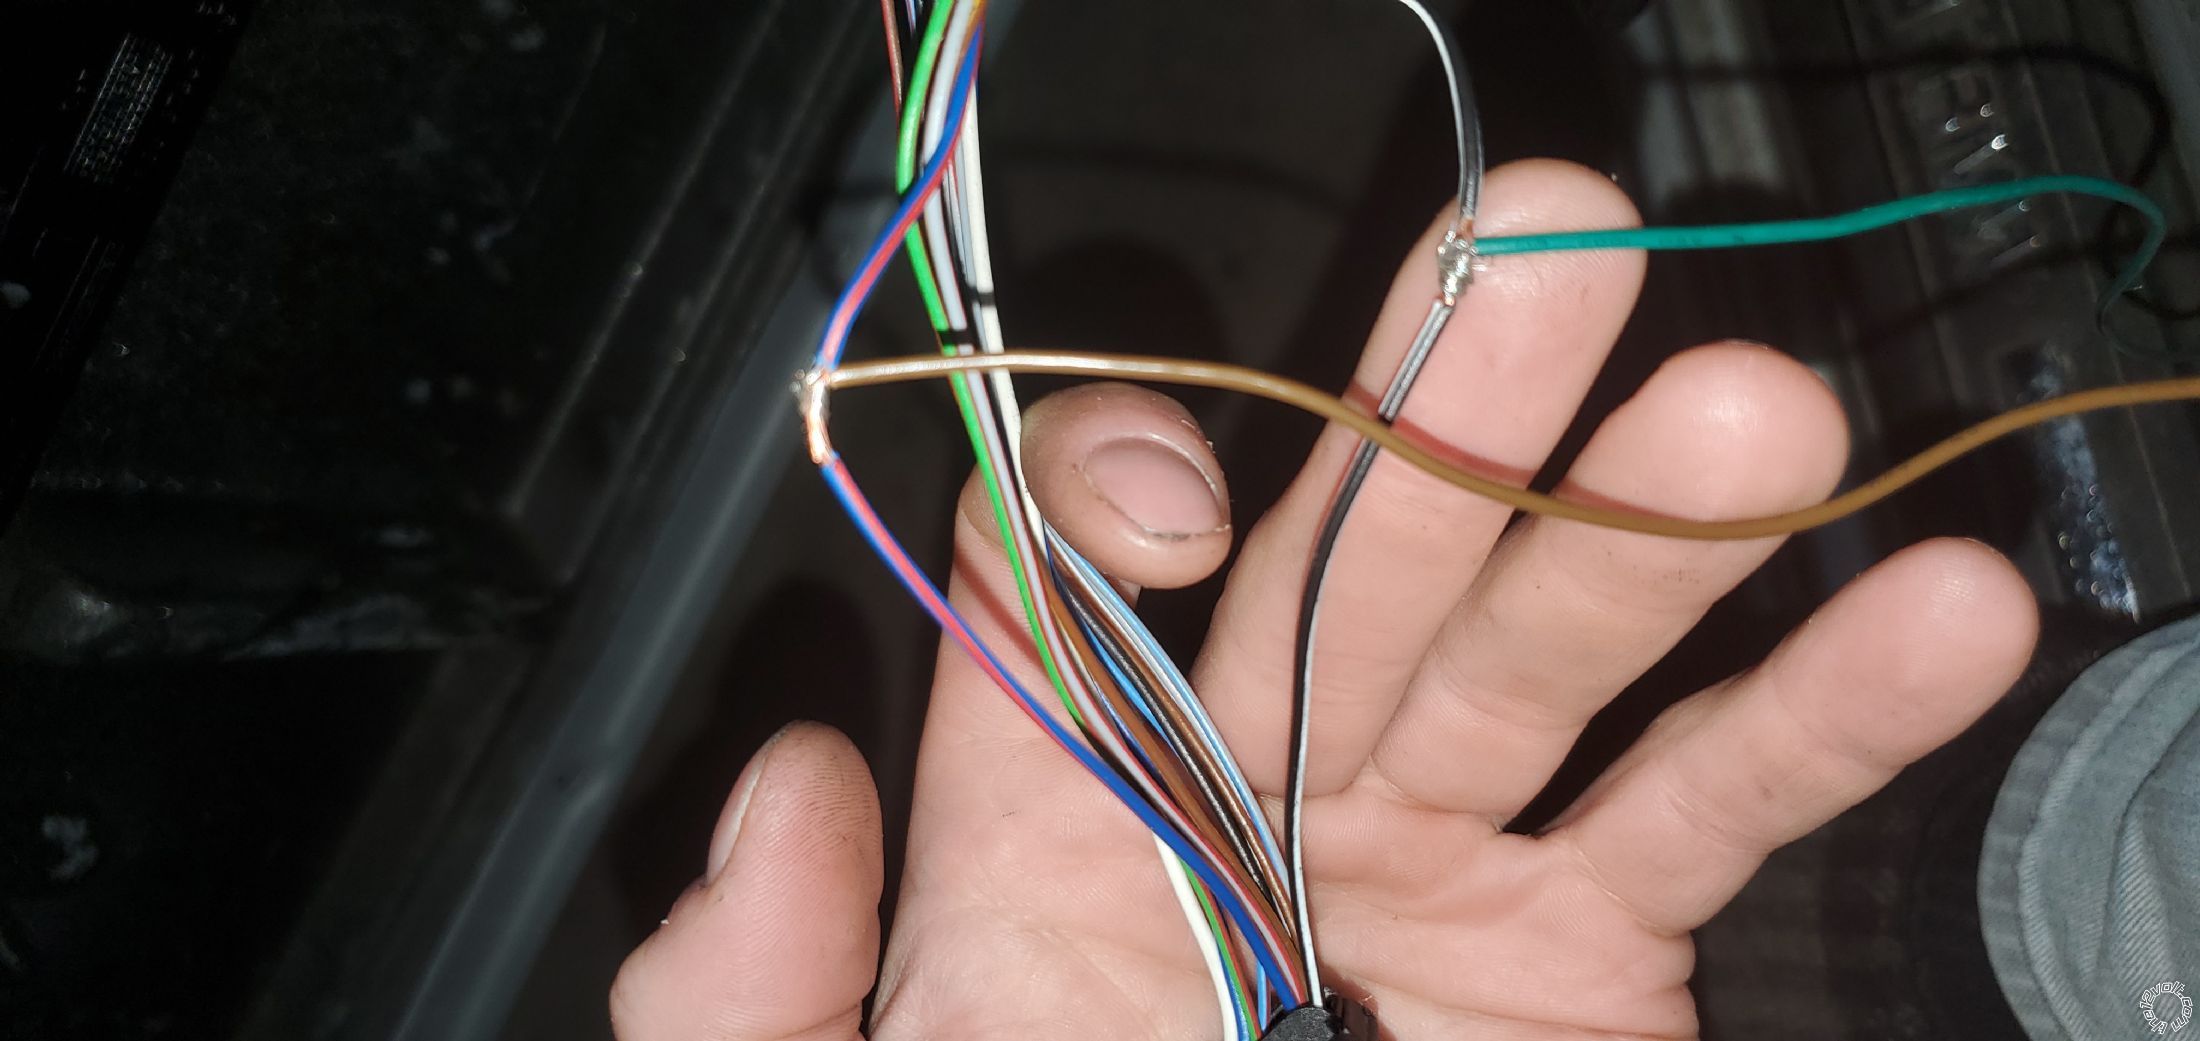 BMW E39 Remote Starter Wiring Confusion -- posted image.